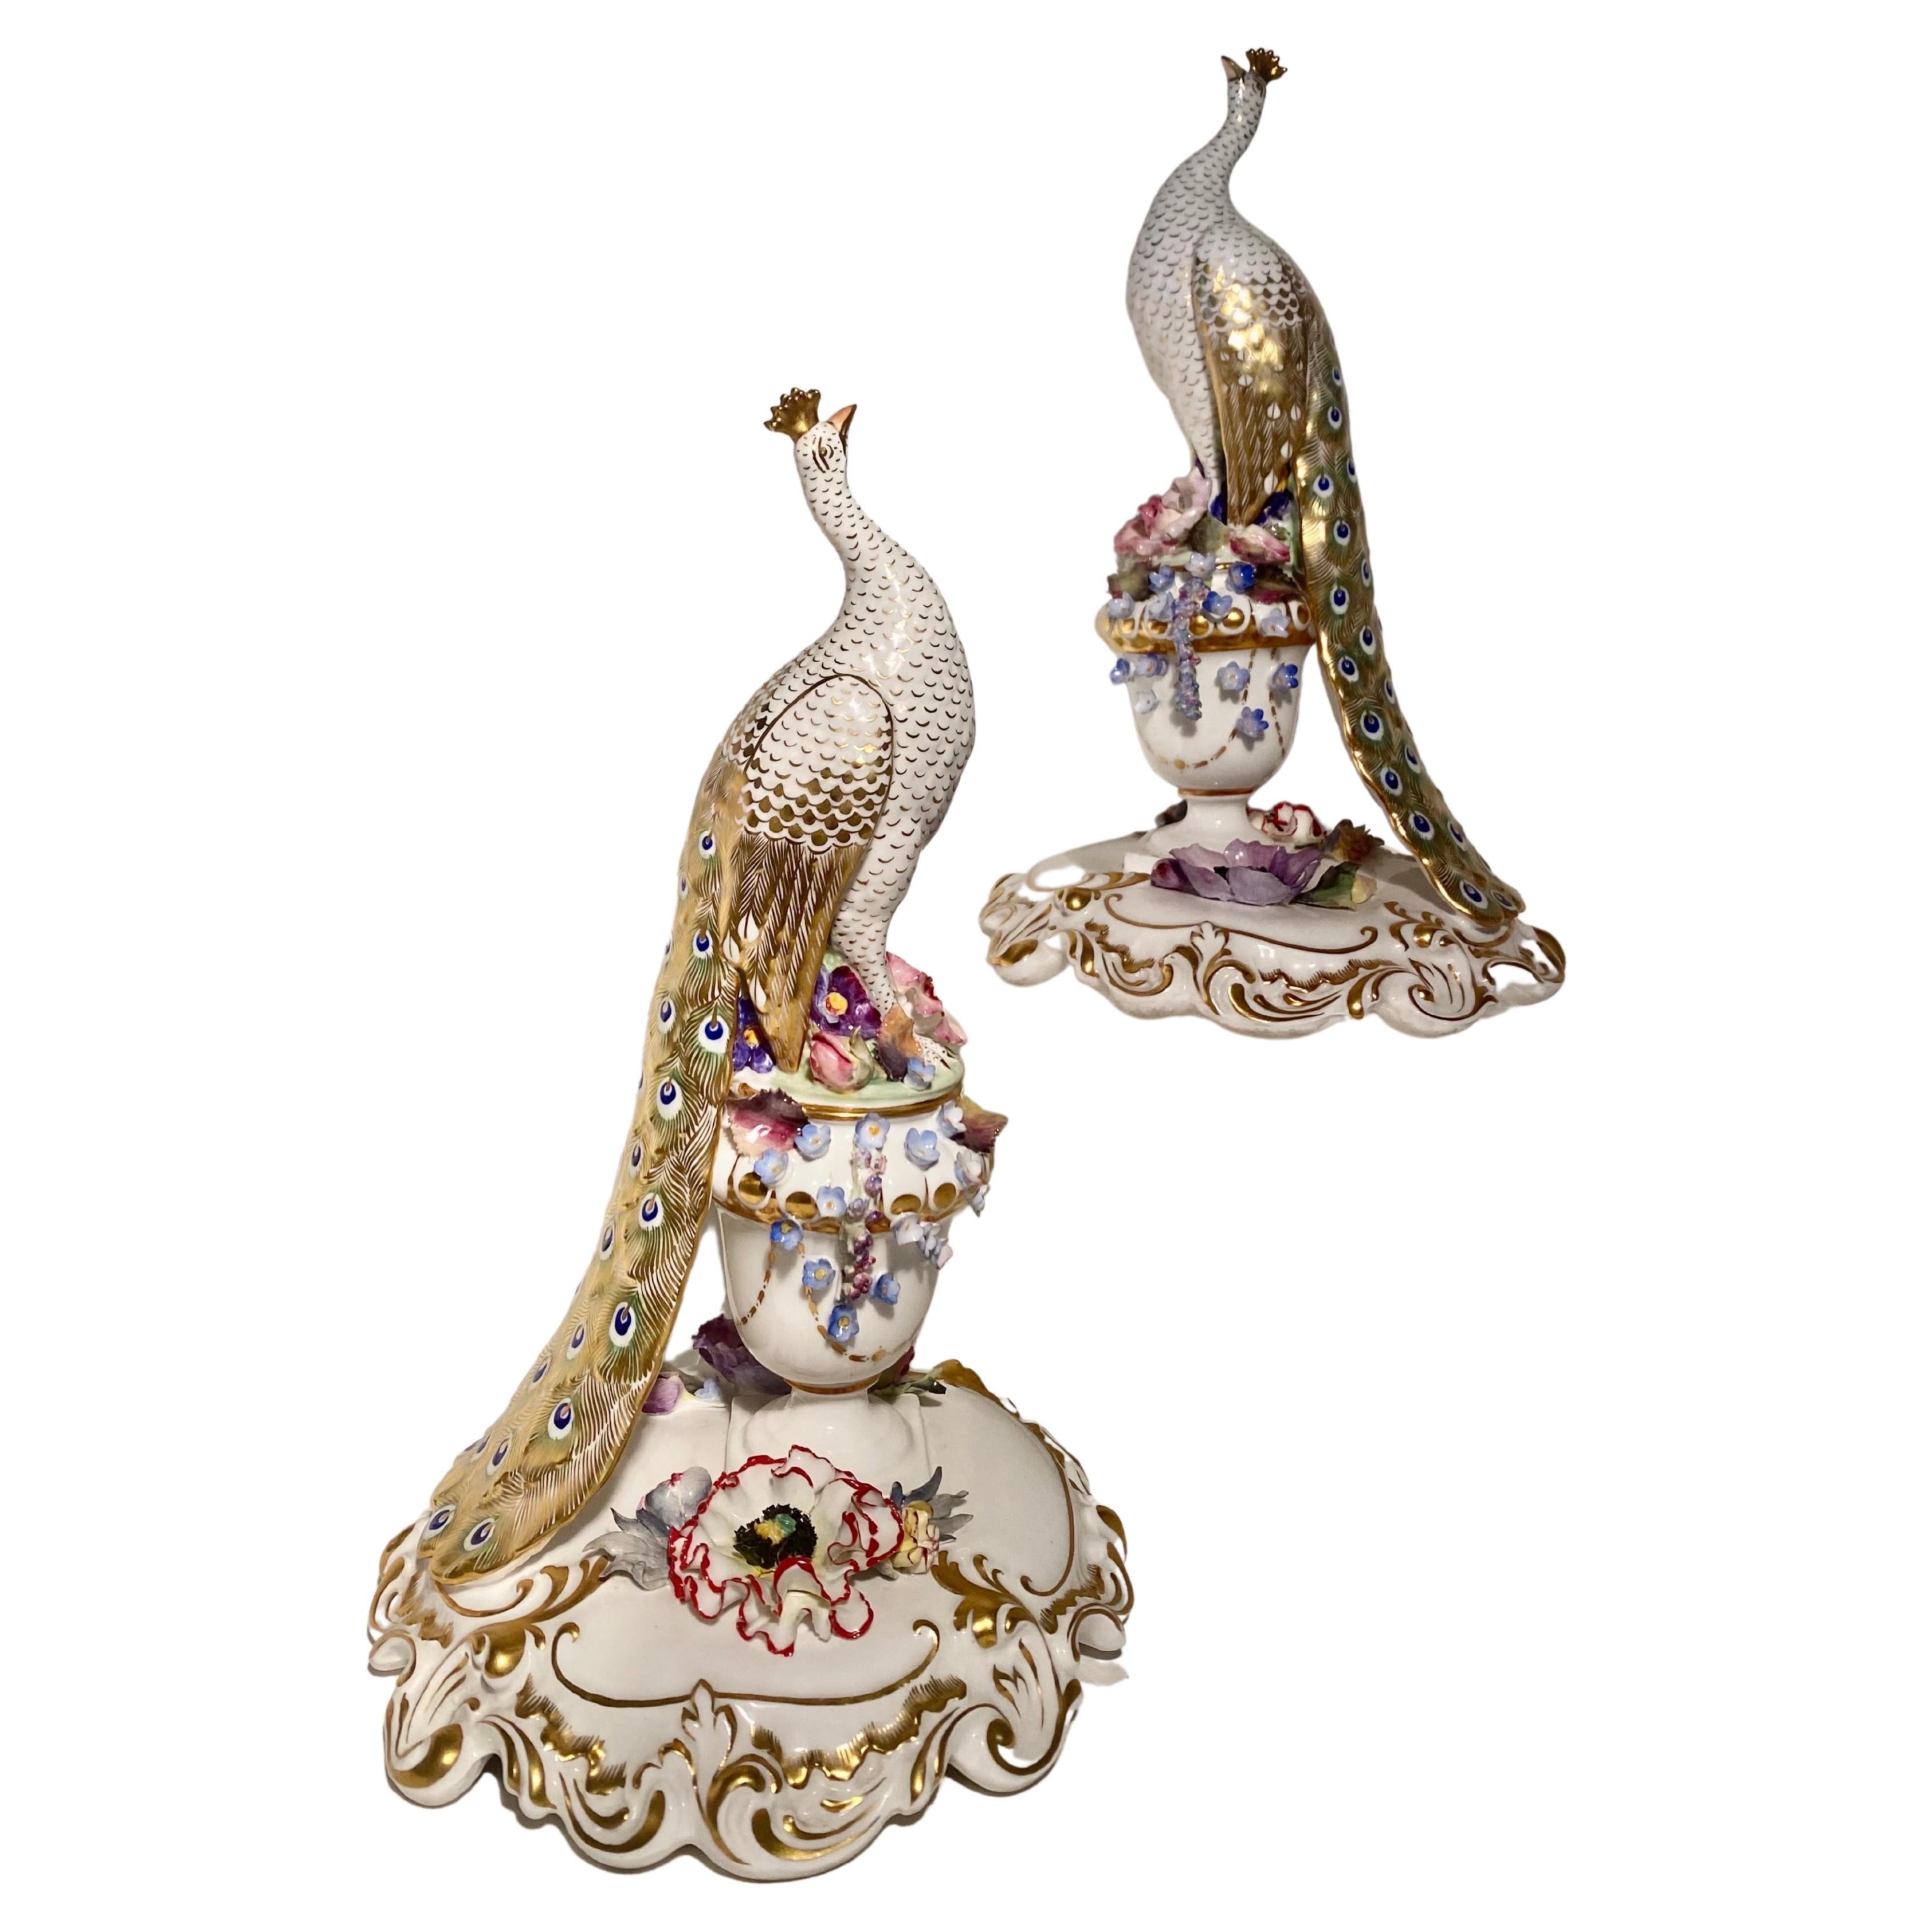 Royal Crown Derby Porcelain Figure, Modelled as a Peacock For Sale 8